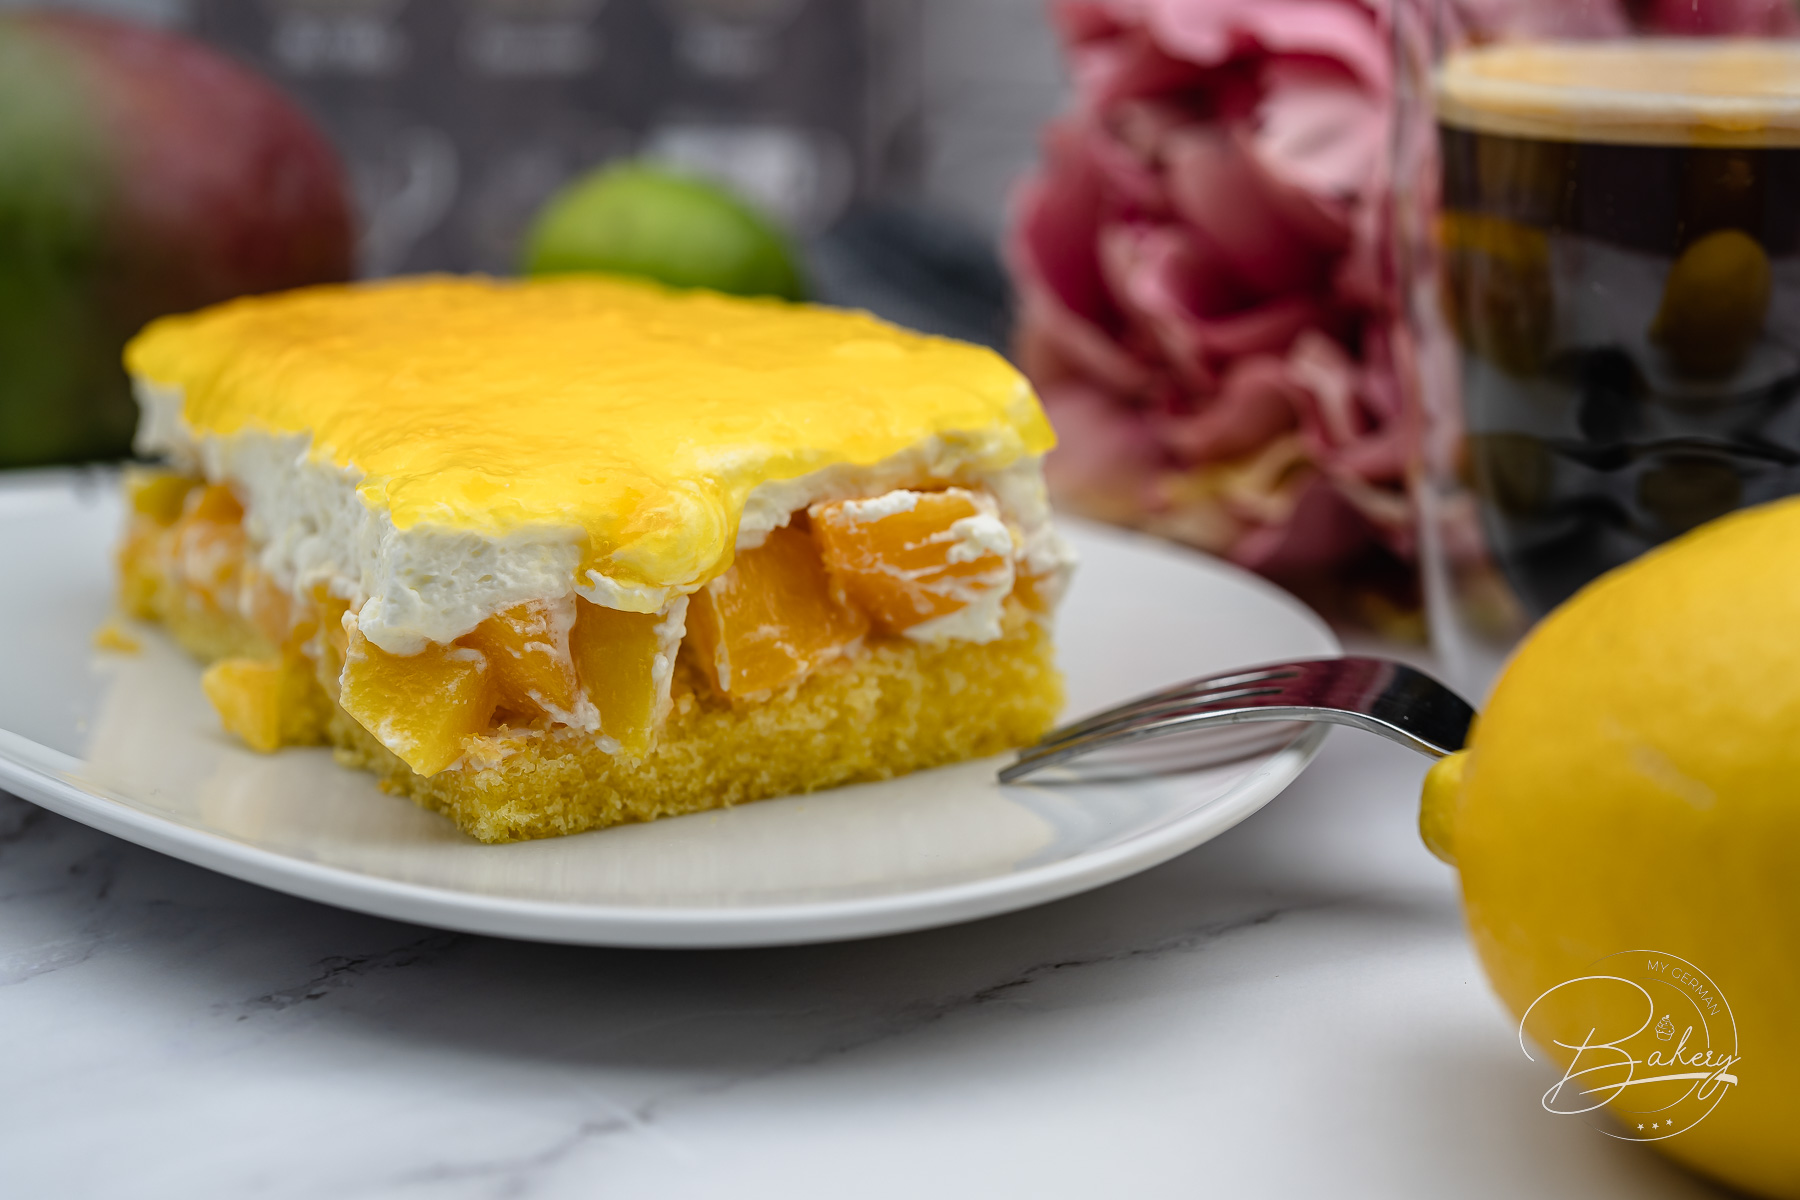 Cream cake without flour - sponge cake with passion fruit - gluten free - Passion fruit sponge cake gluten free - sponge cake with passion fruit - gluten free - baking without flour, cake without flour - use pudding powder instead of flour